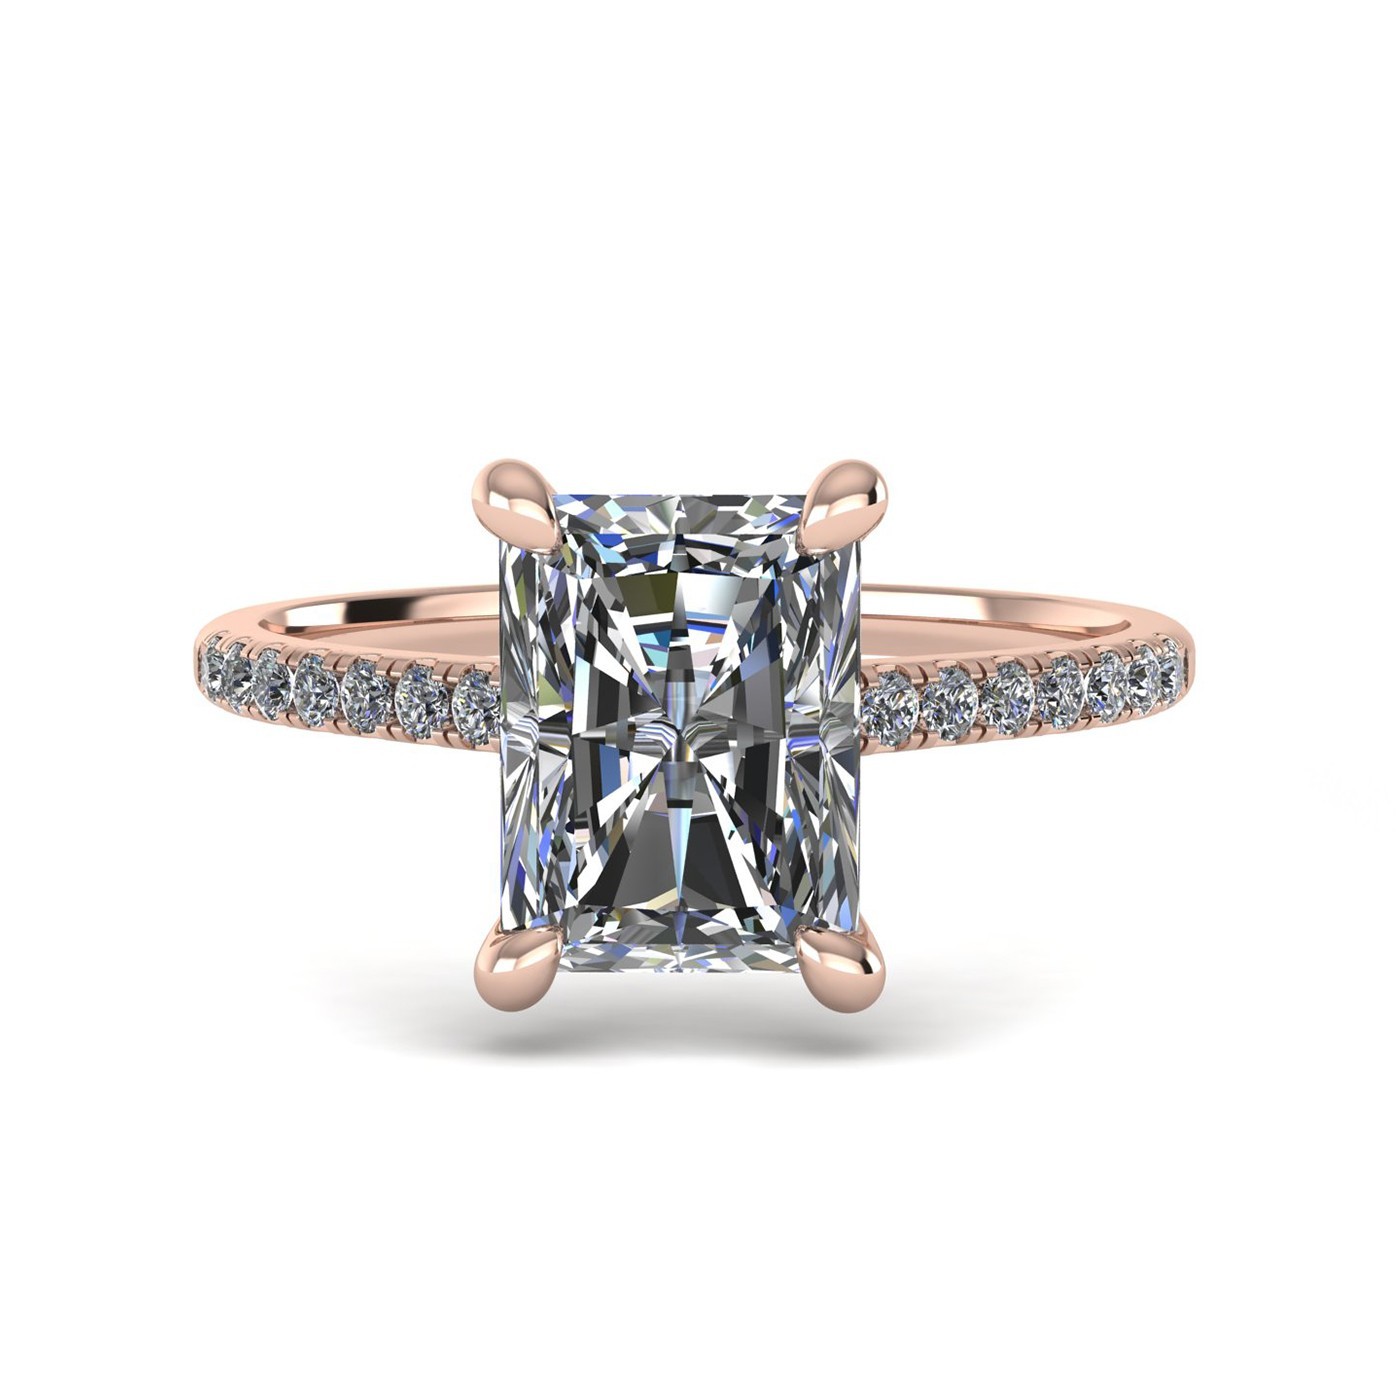 18k rose gold  1,20 ct 4 prongs radiant cut diamond engagement ring with whisper thin pavÉ set band Photos & images